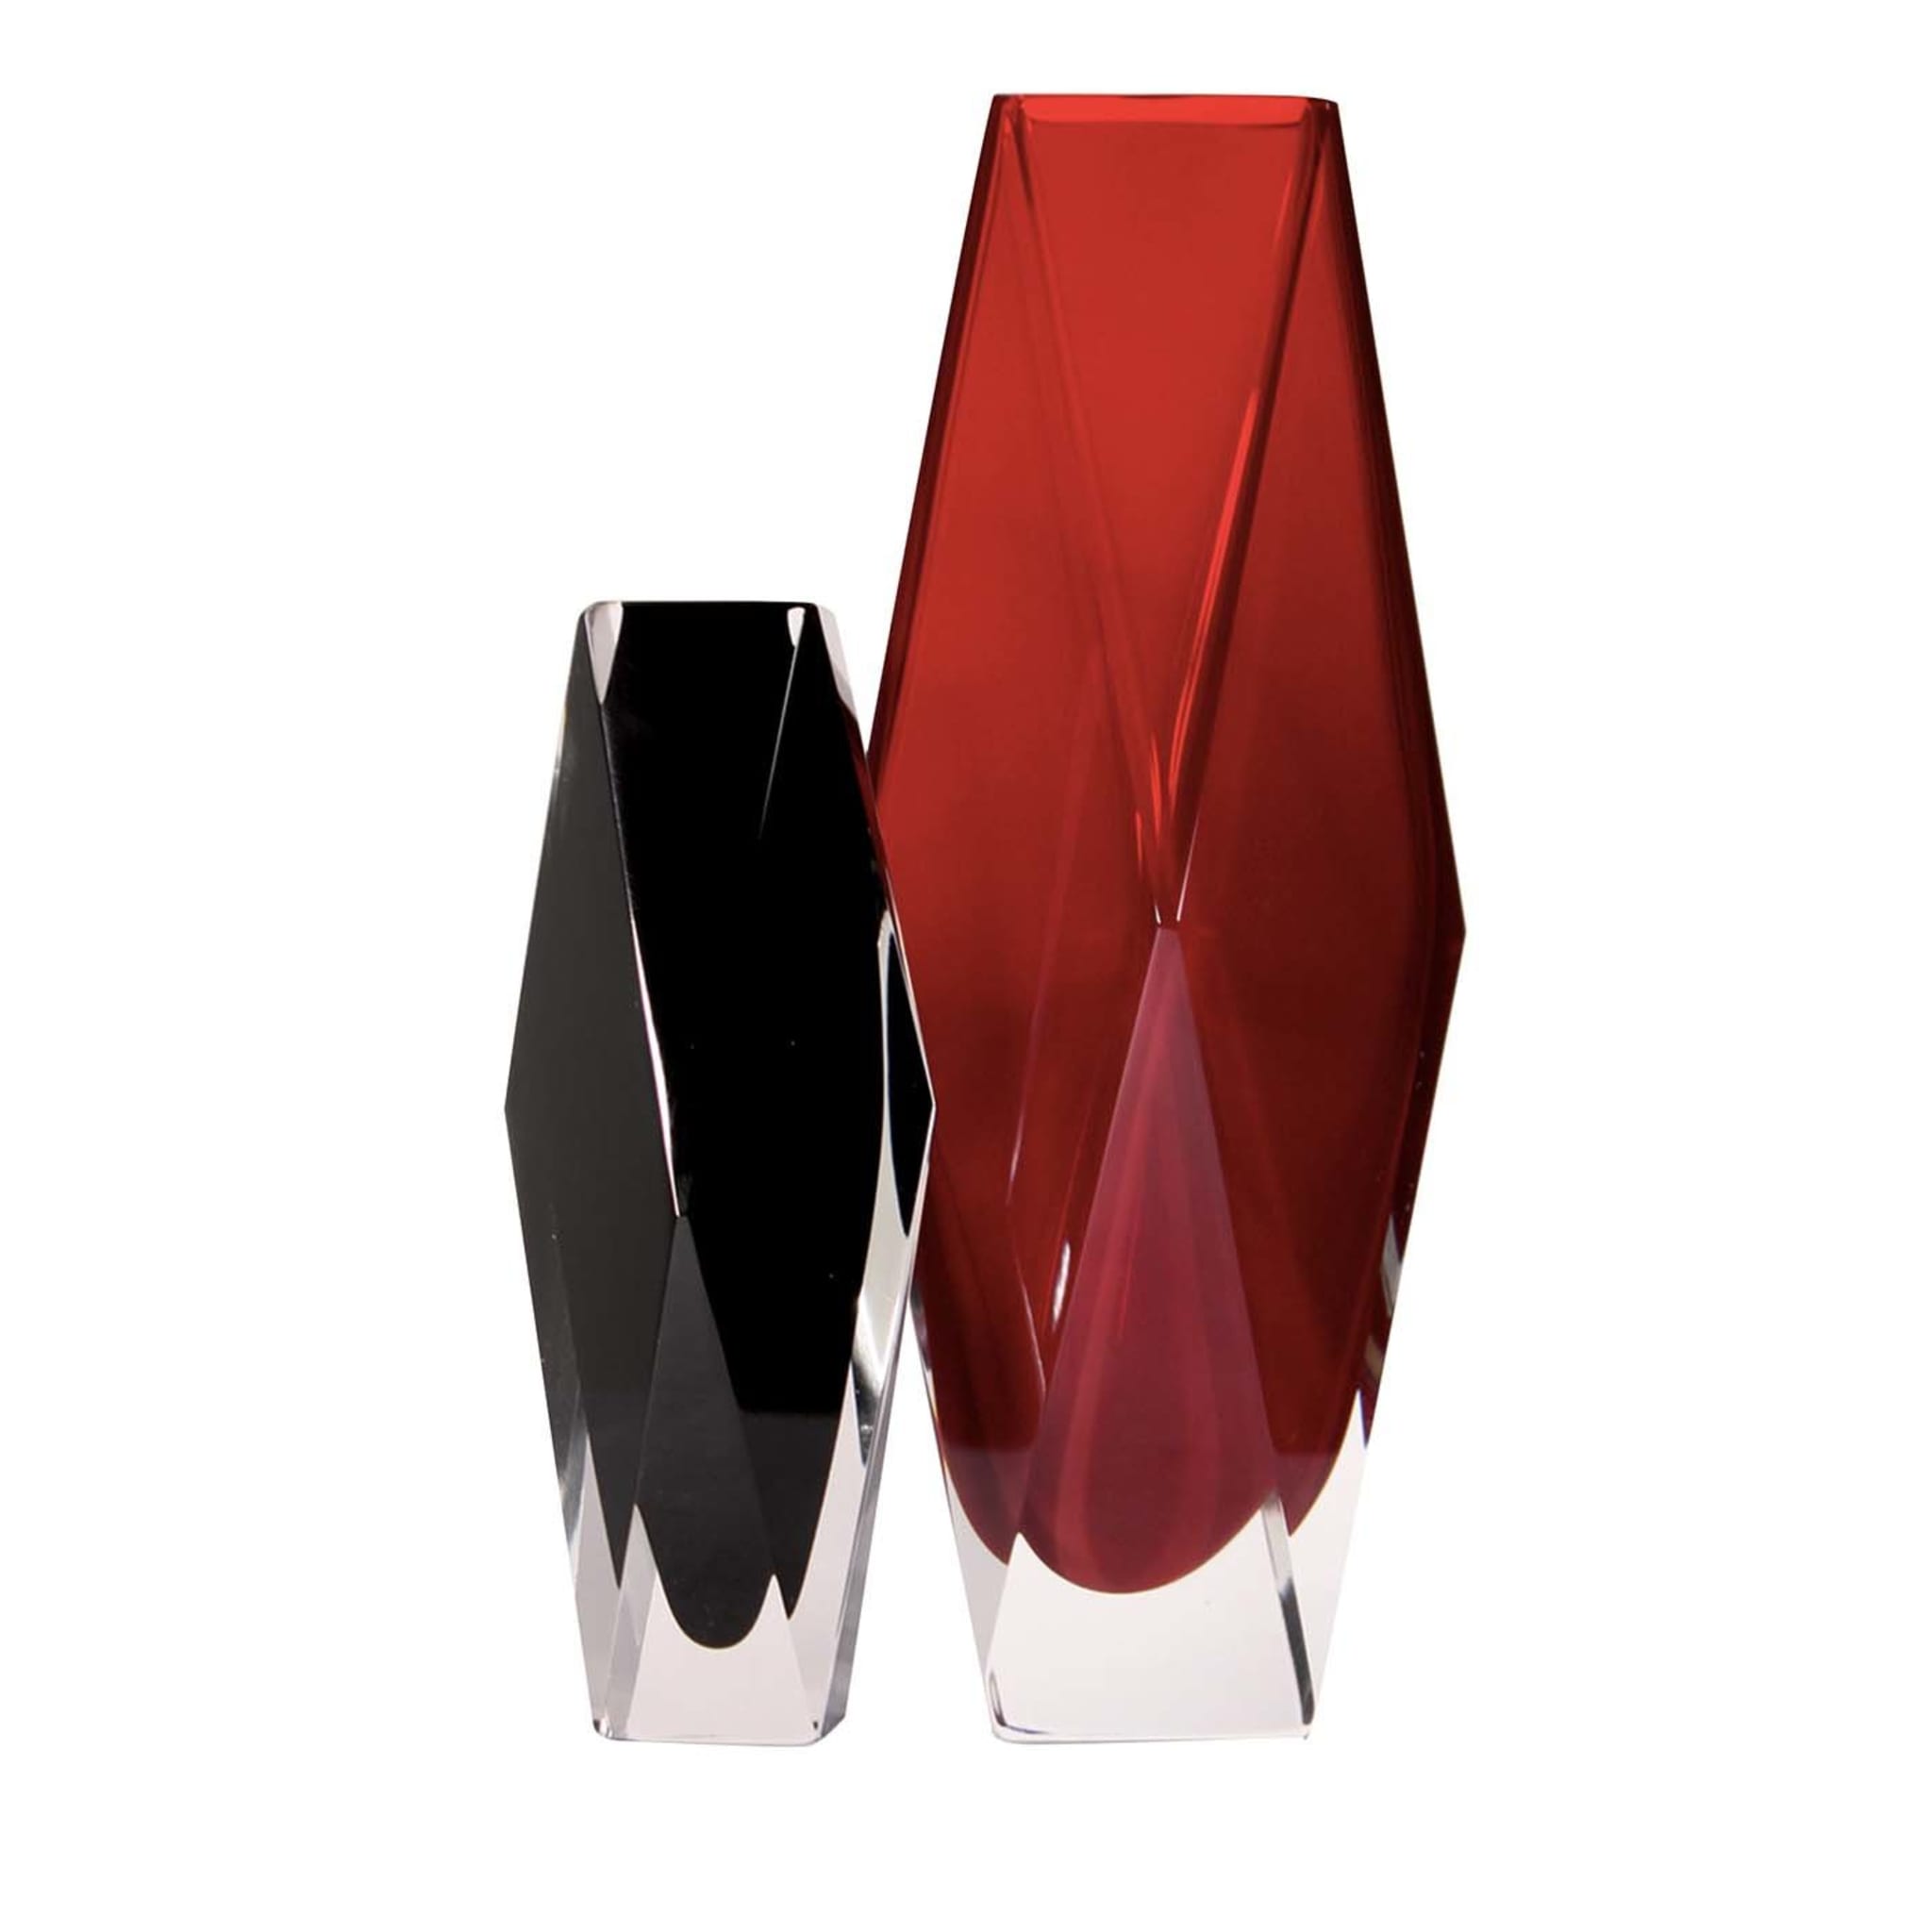 Gotham Set of Two Black and Red Vases - Main view